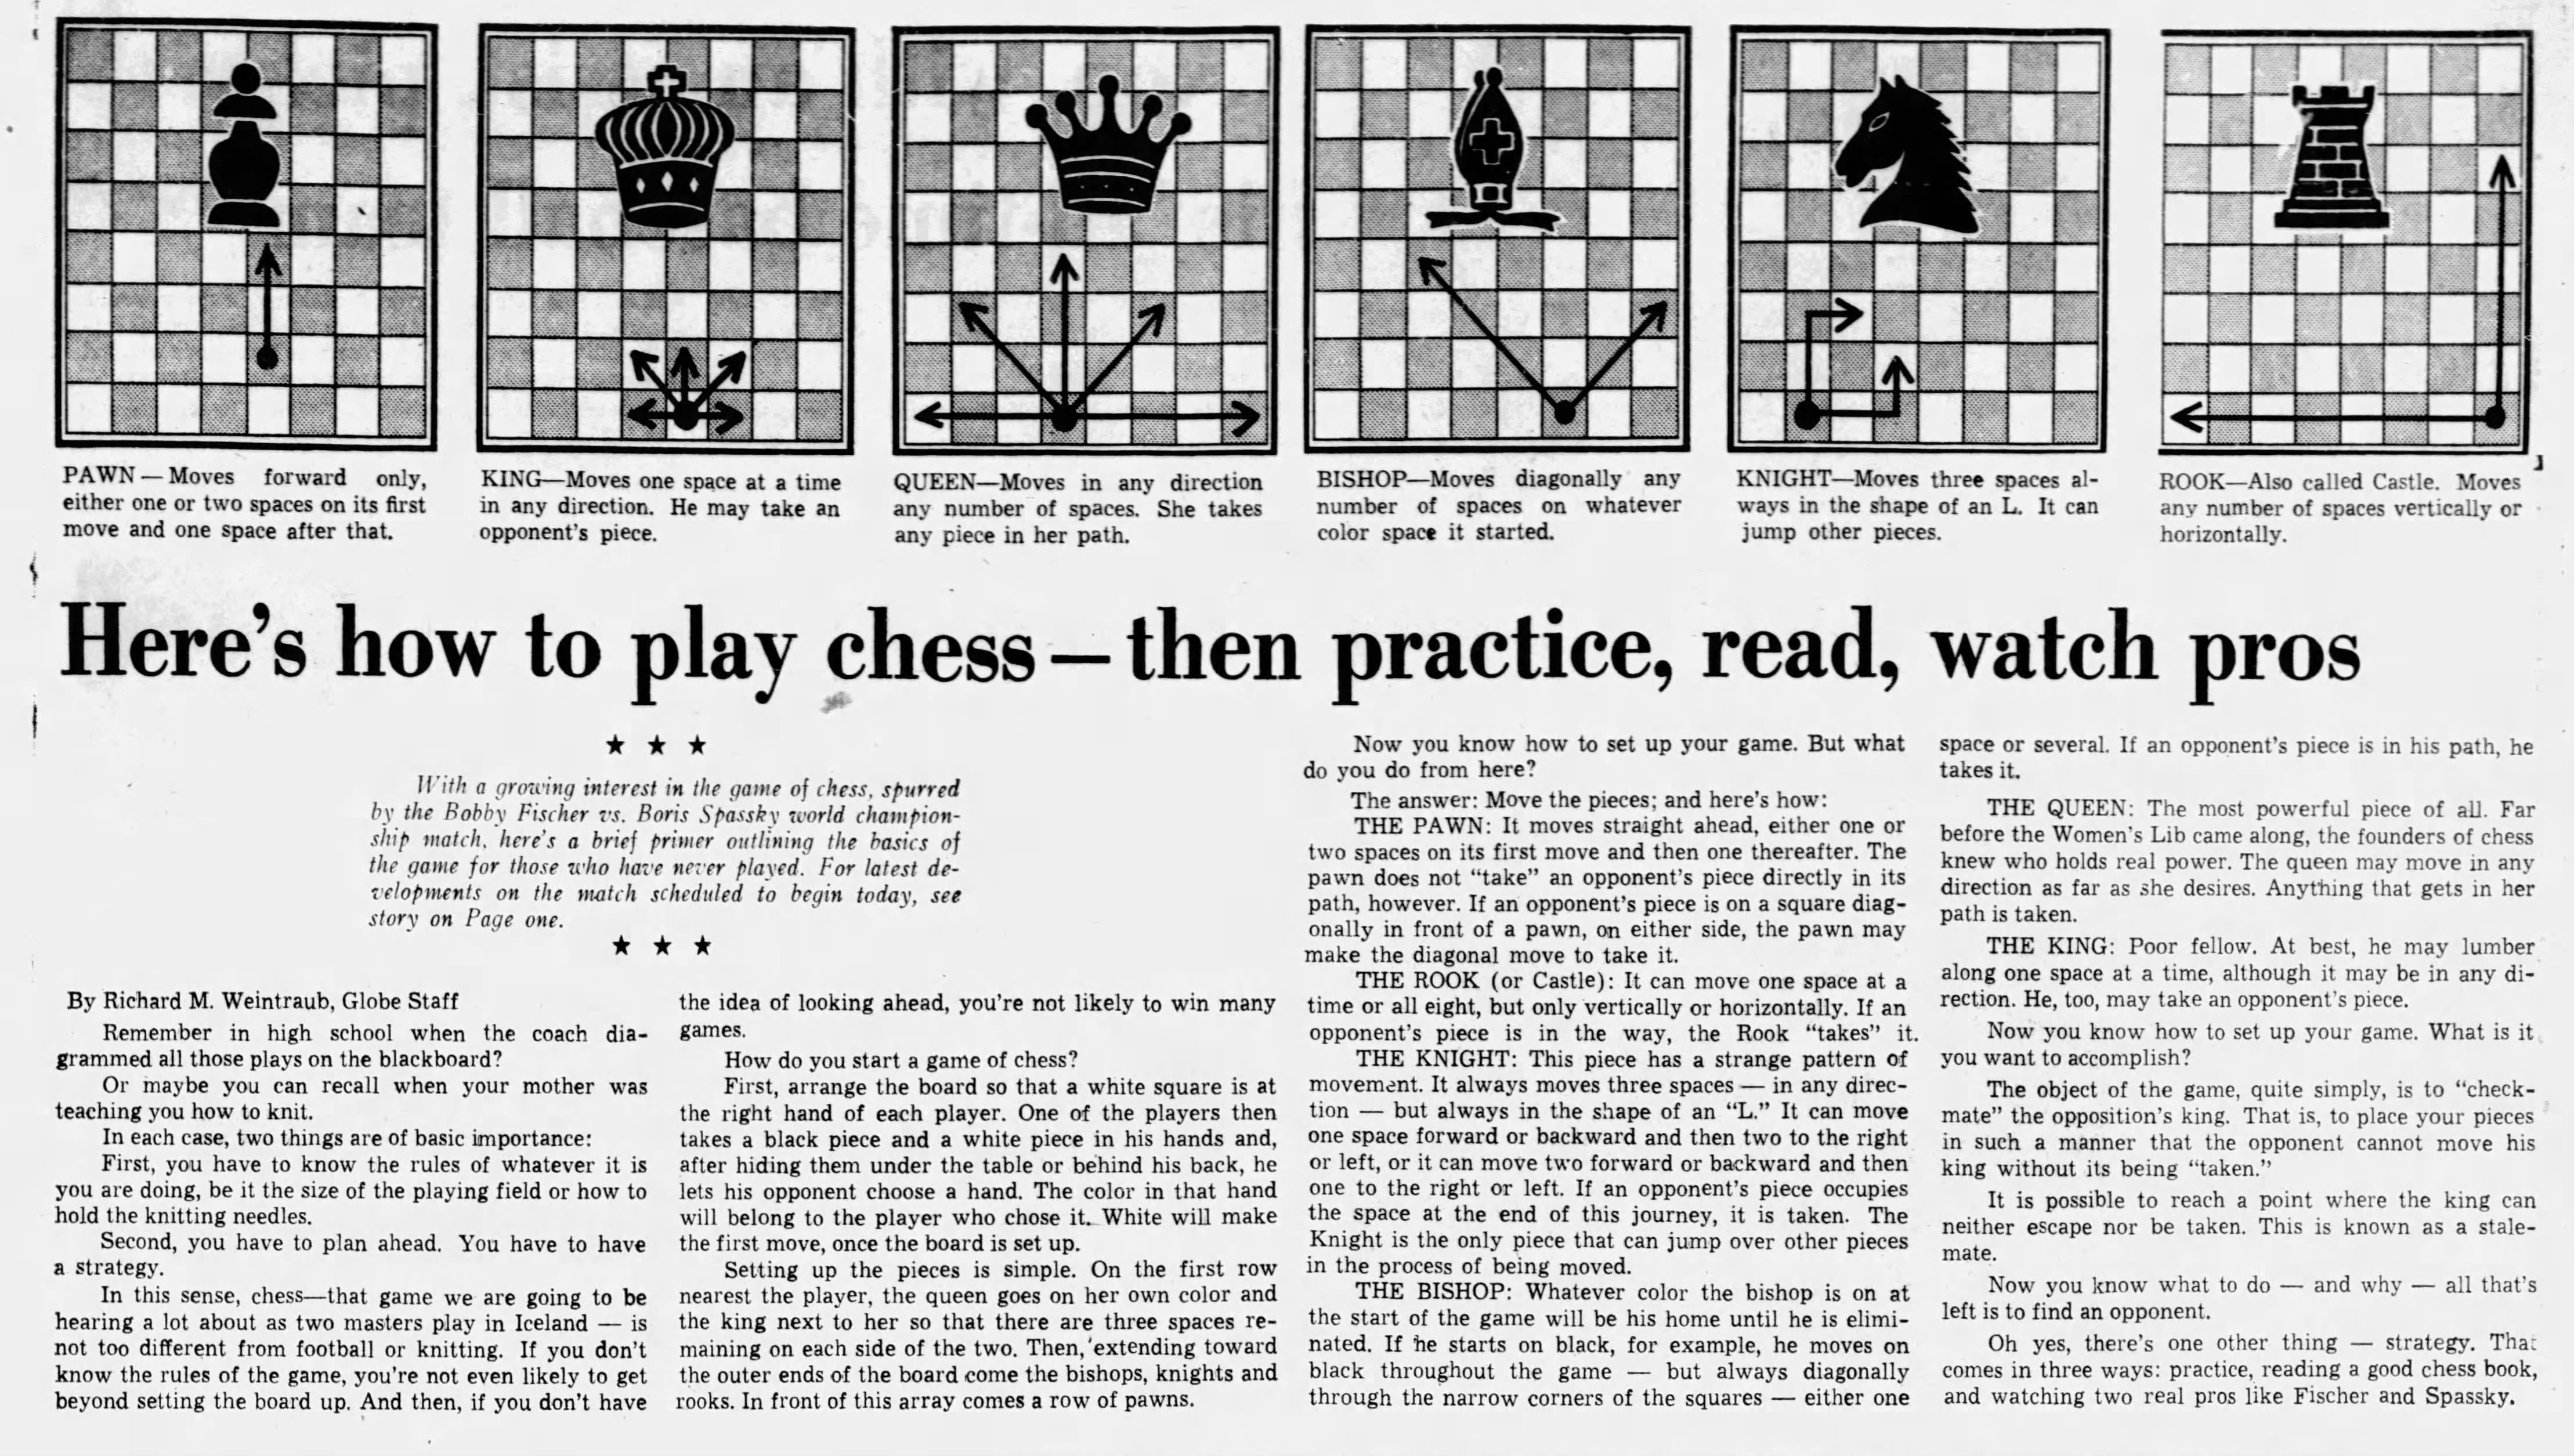 Here's How to Play Chess--Then Practice, Read, Watch Pros